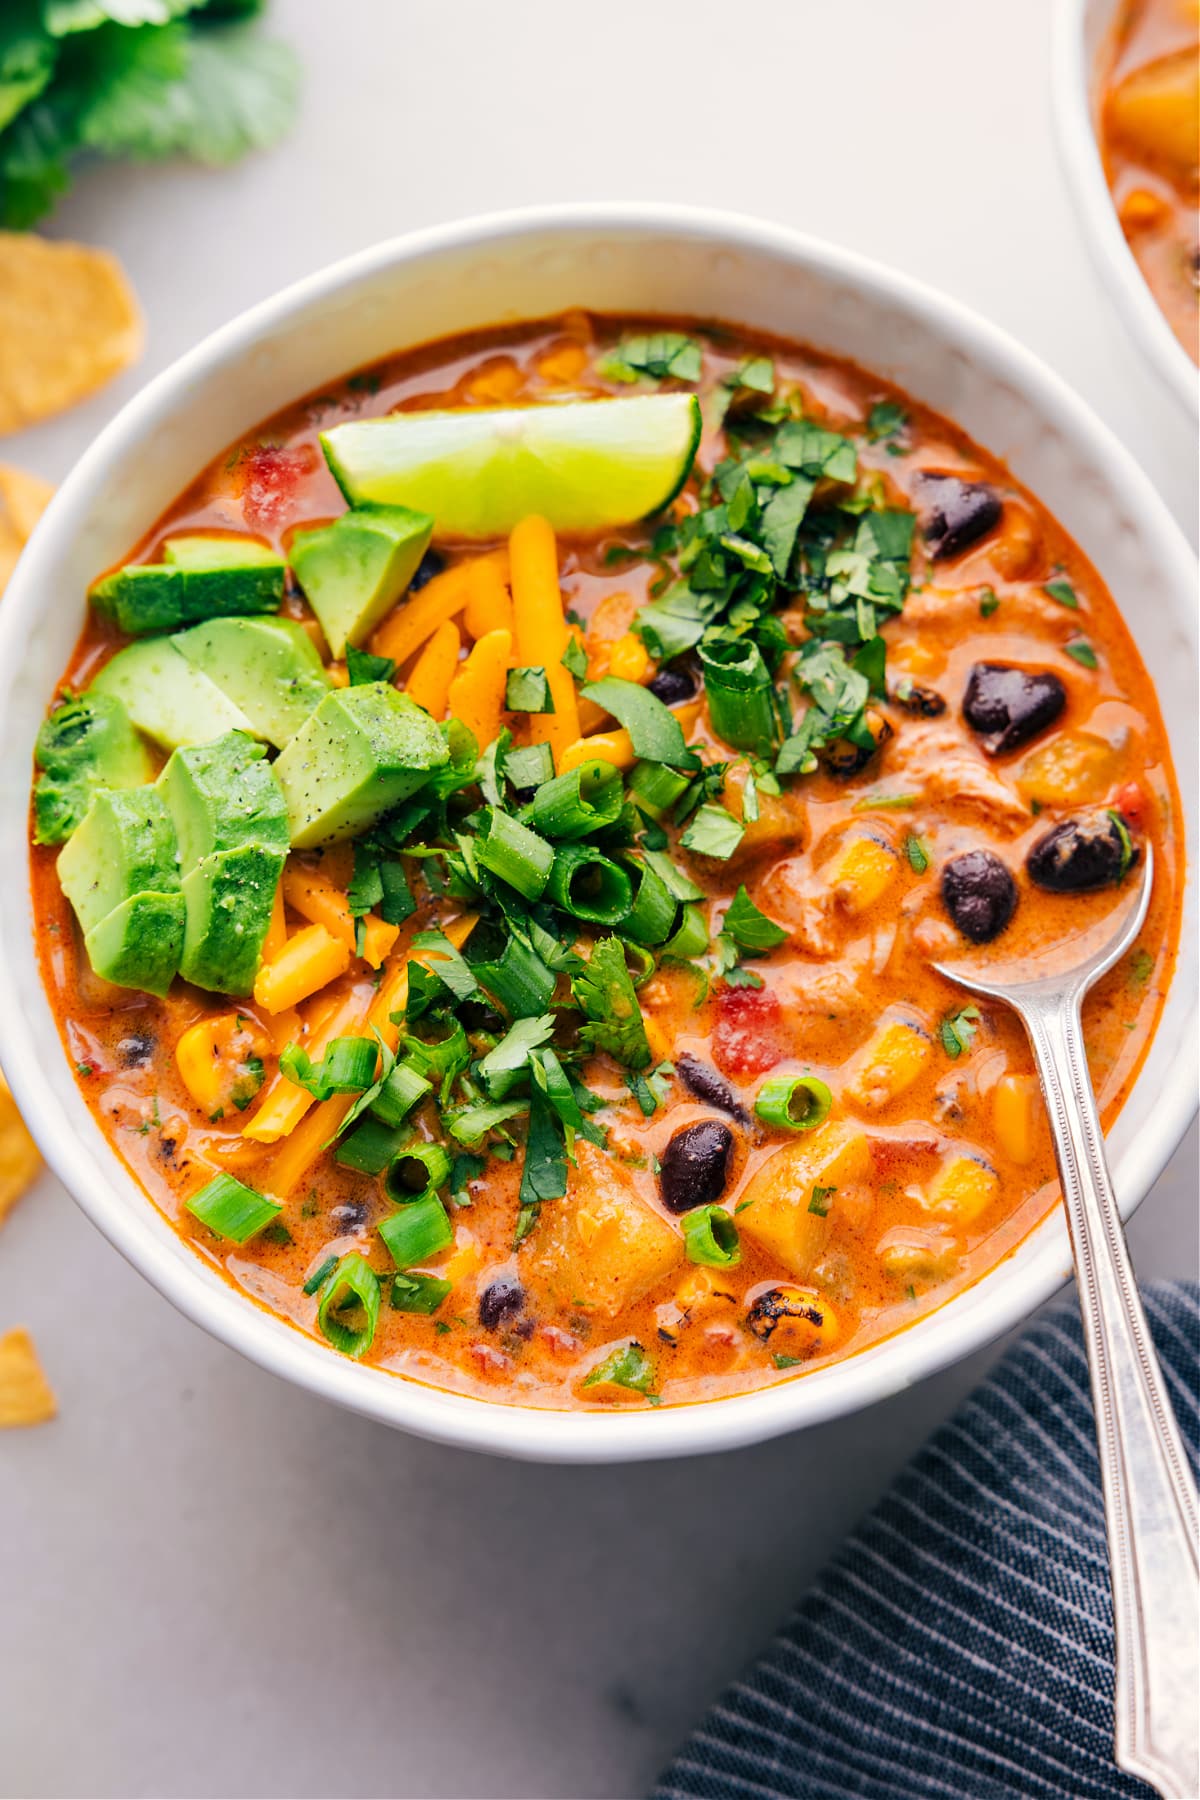 A bowl of the southwestern corn chowder with black beans, generously topped with green onions, melted cheese, and sliced avocados, ready to be enjoyed.